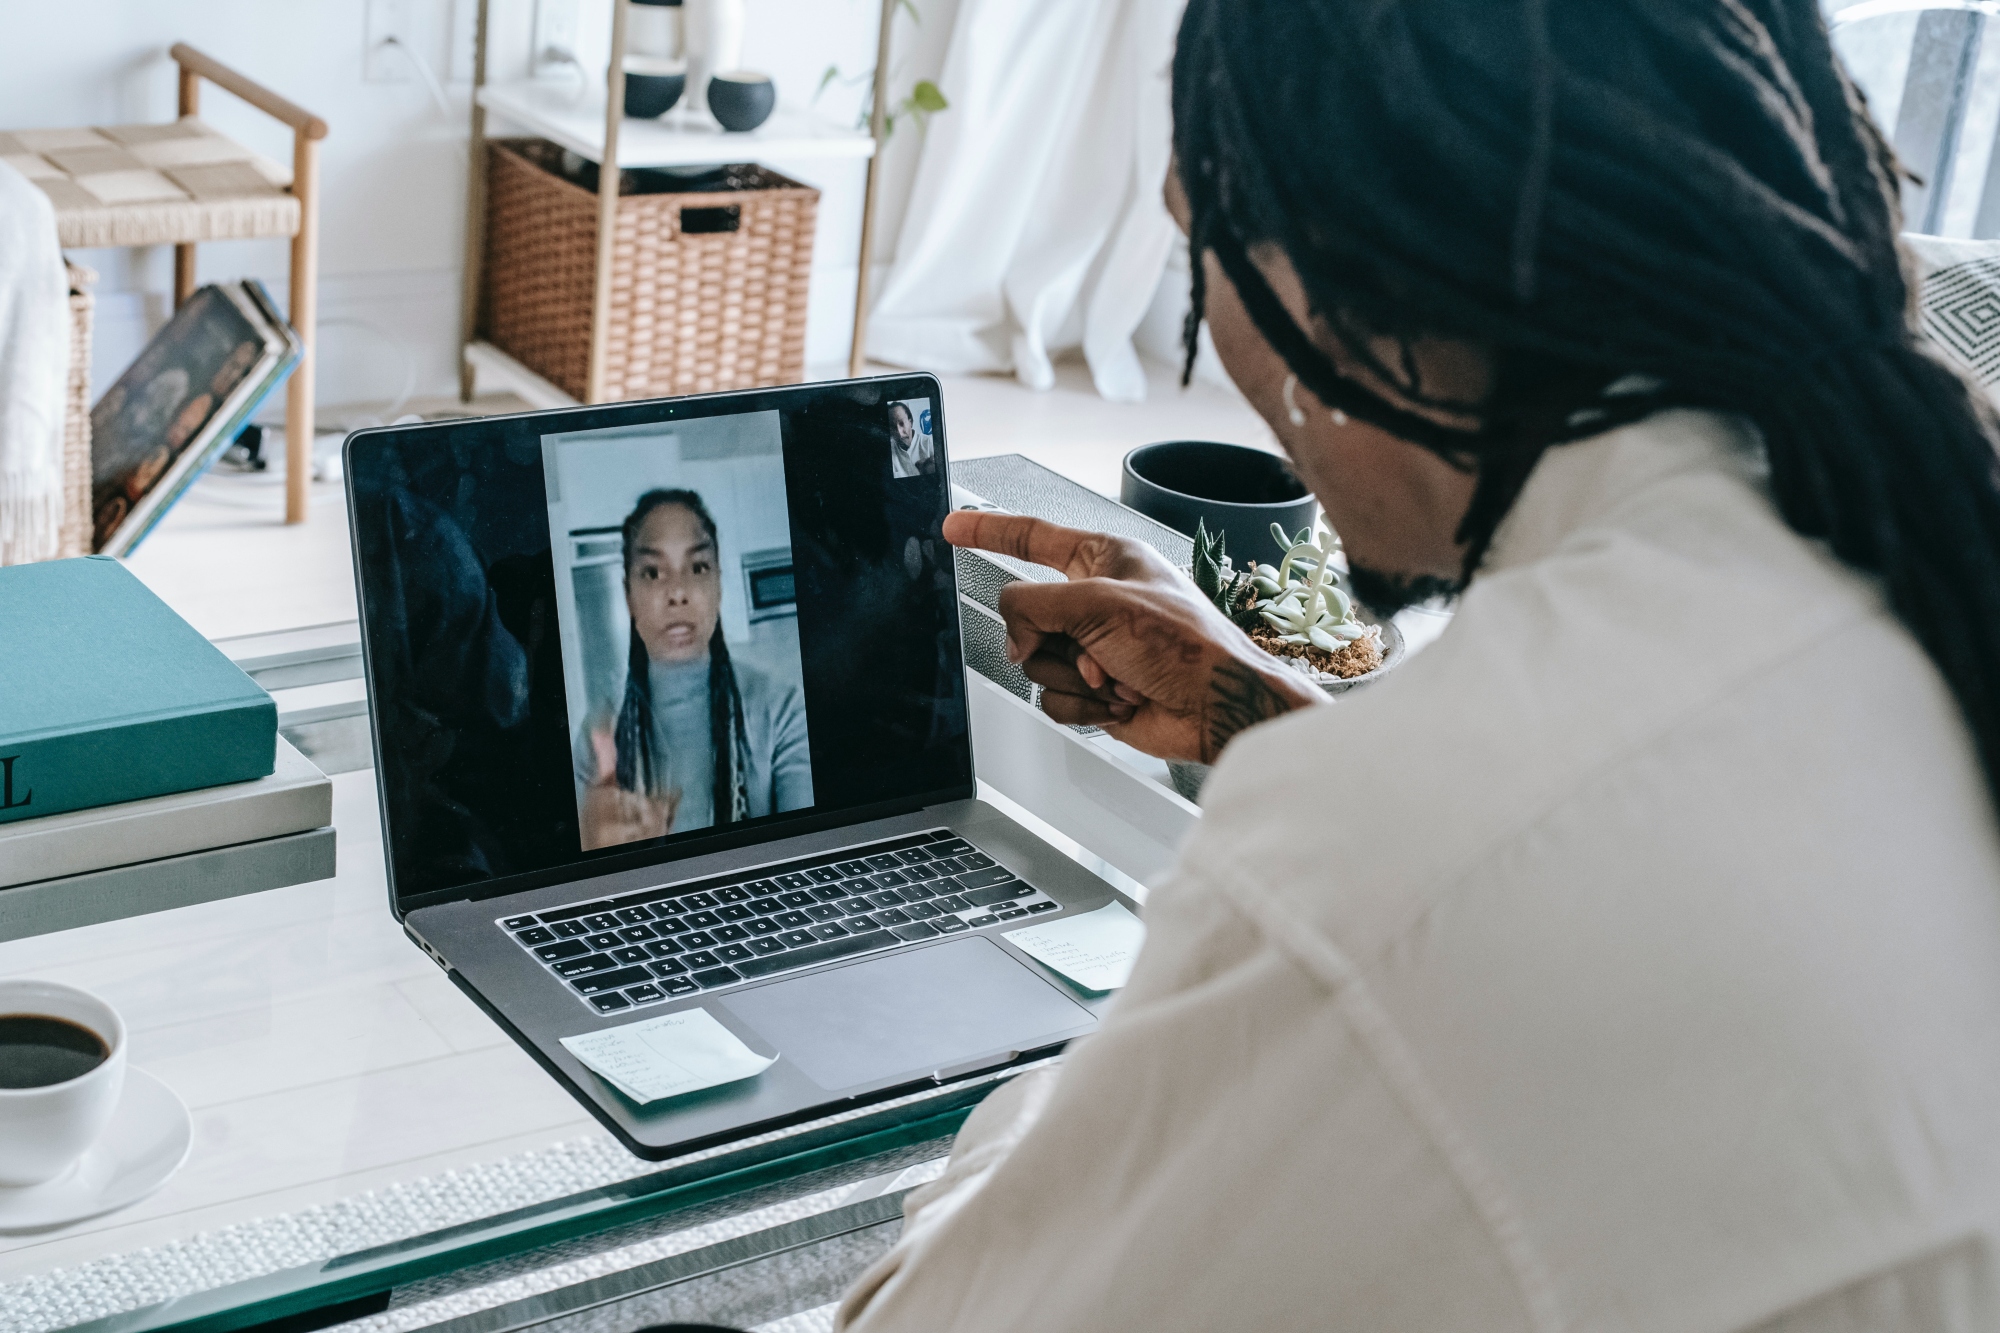 A woman on a laptop talks to another woman via videocall